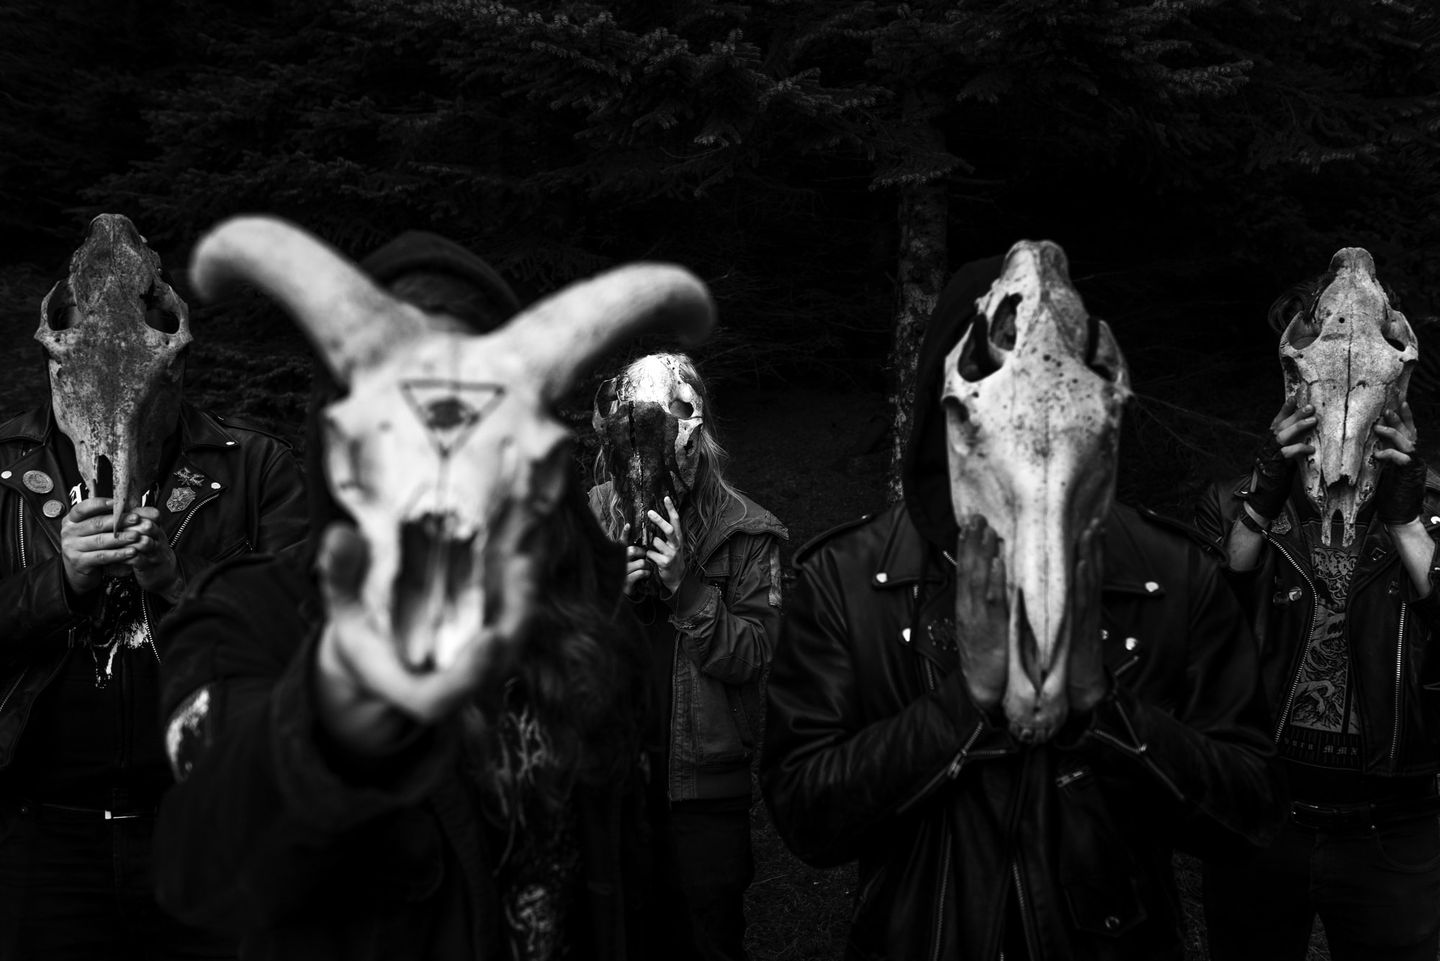 ‘That world where veils, blood and smoke go hand in hand with cosmic philosophy.’ Photographs from the black metal scene in Iceland. – The Washington Post